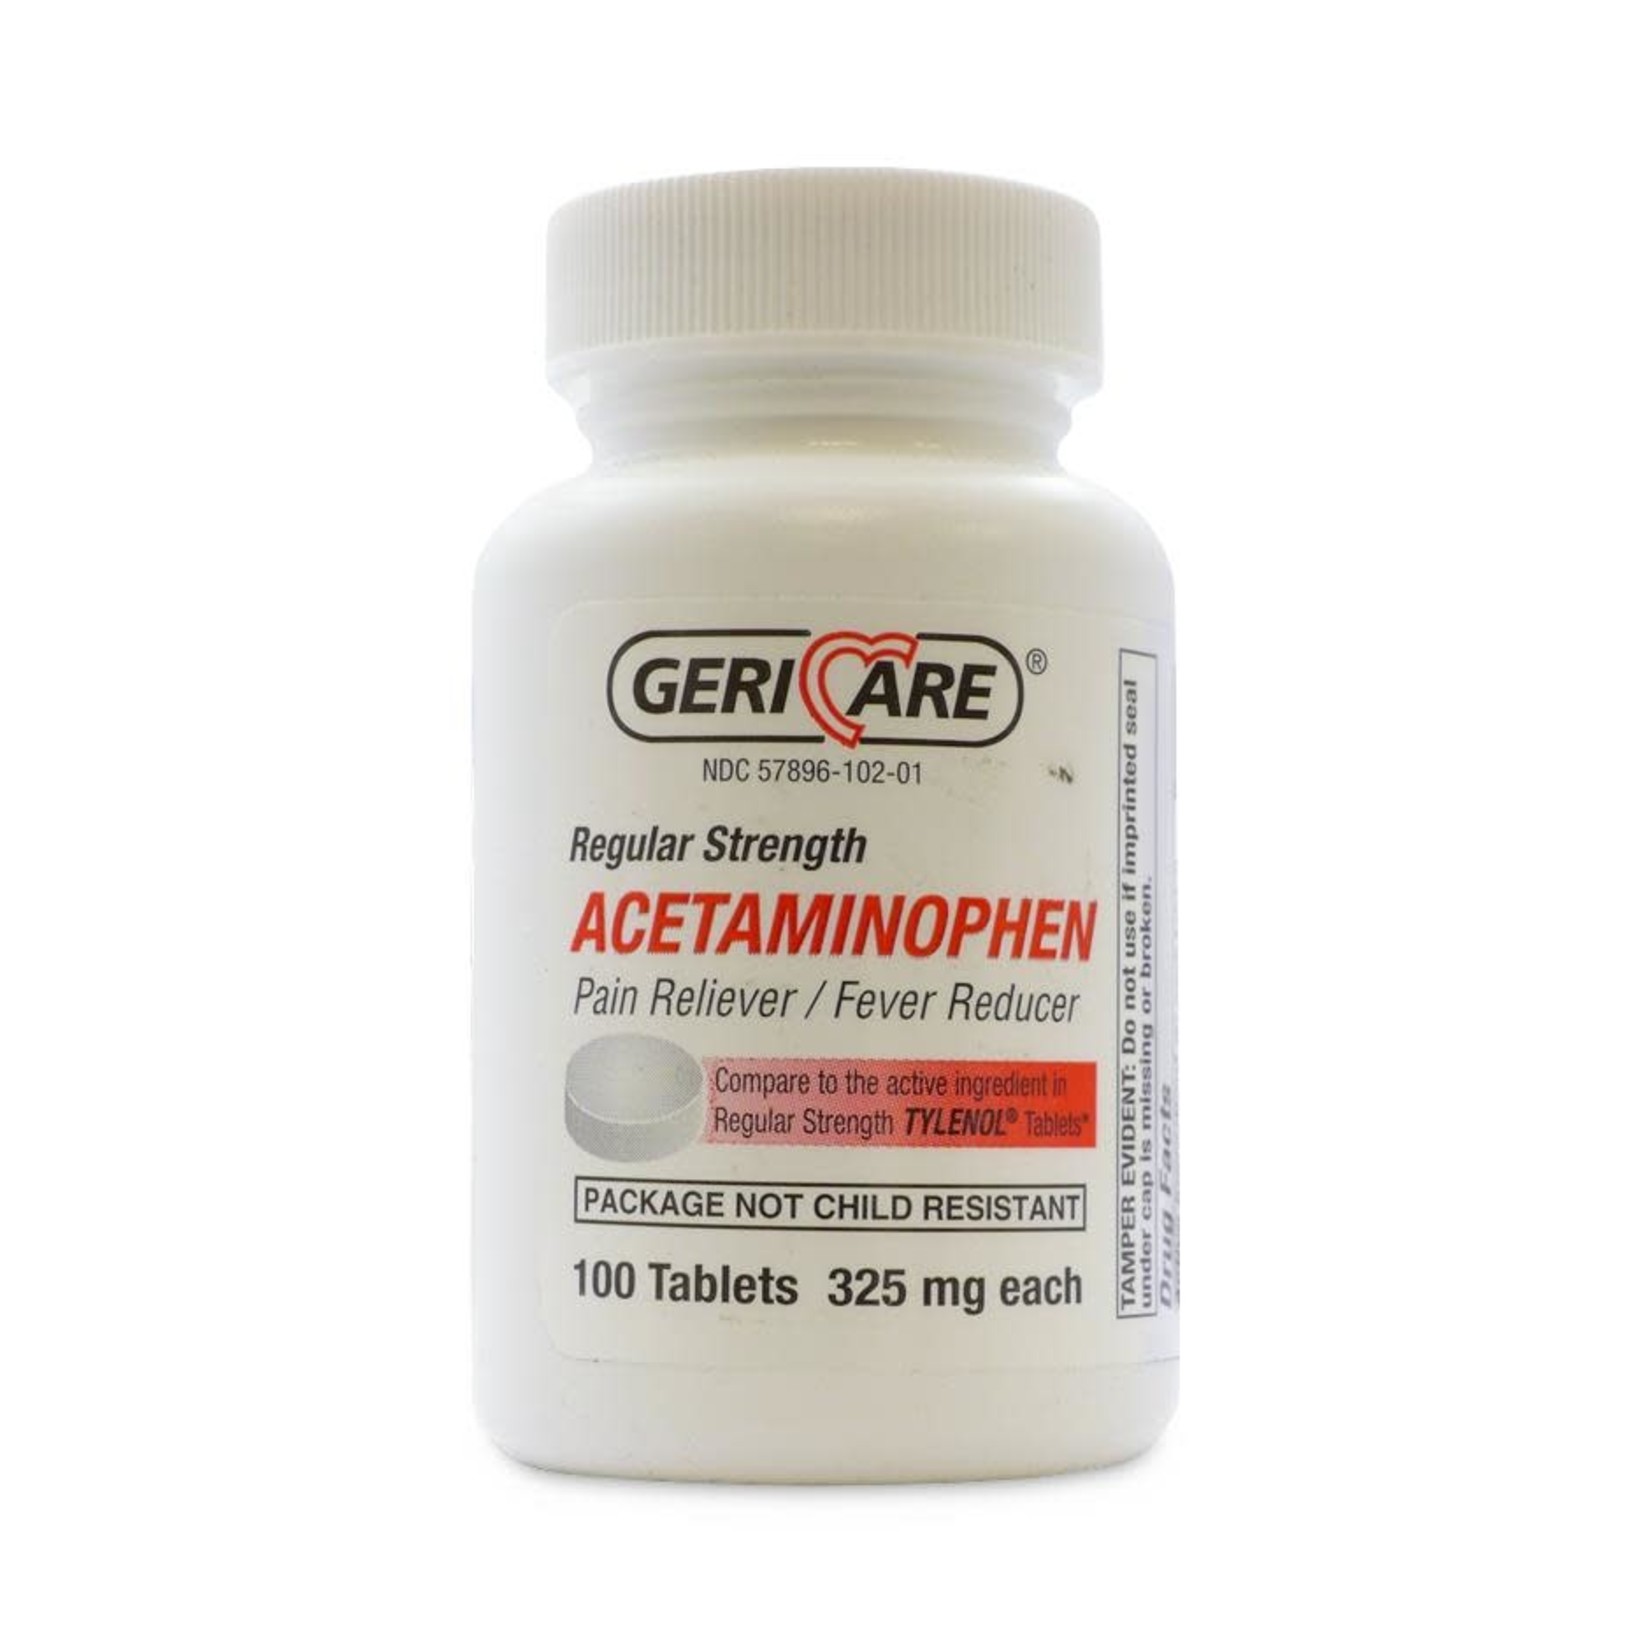 Geri-Care Pain Relief Acetaminophen tablets 325mg 100ct.